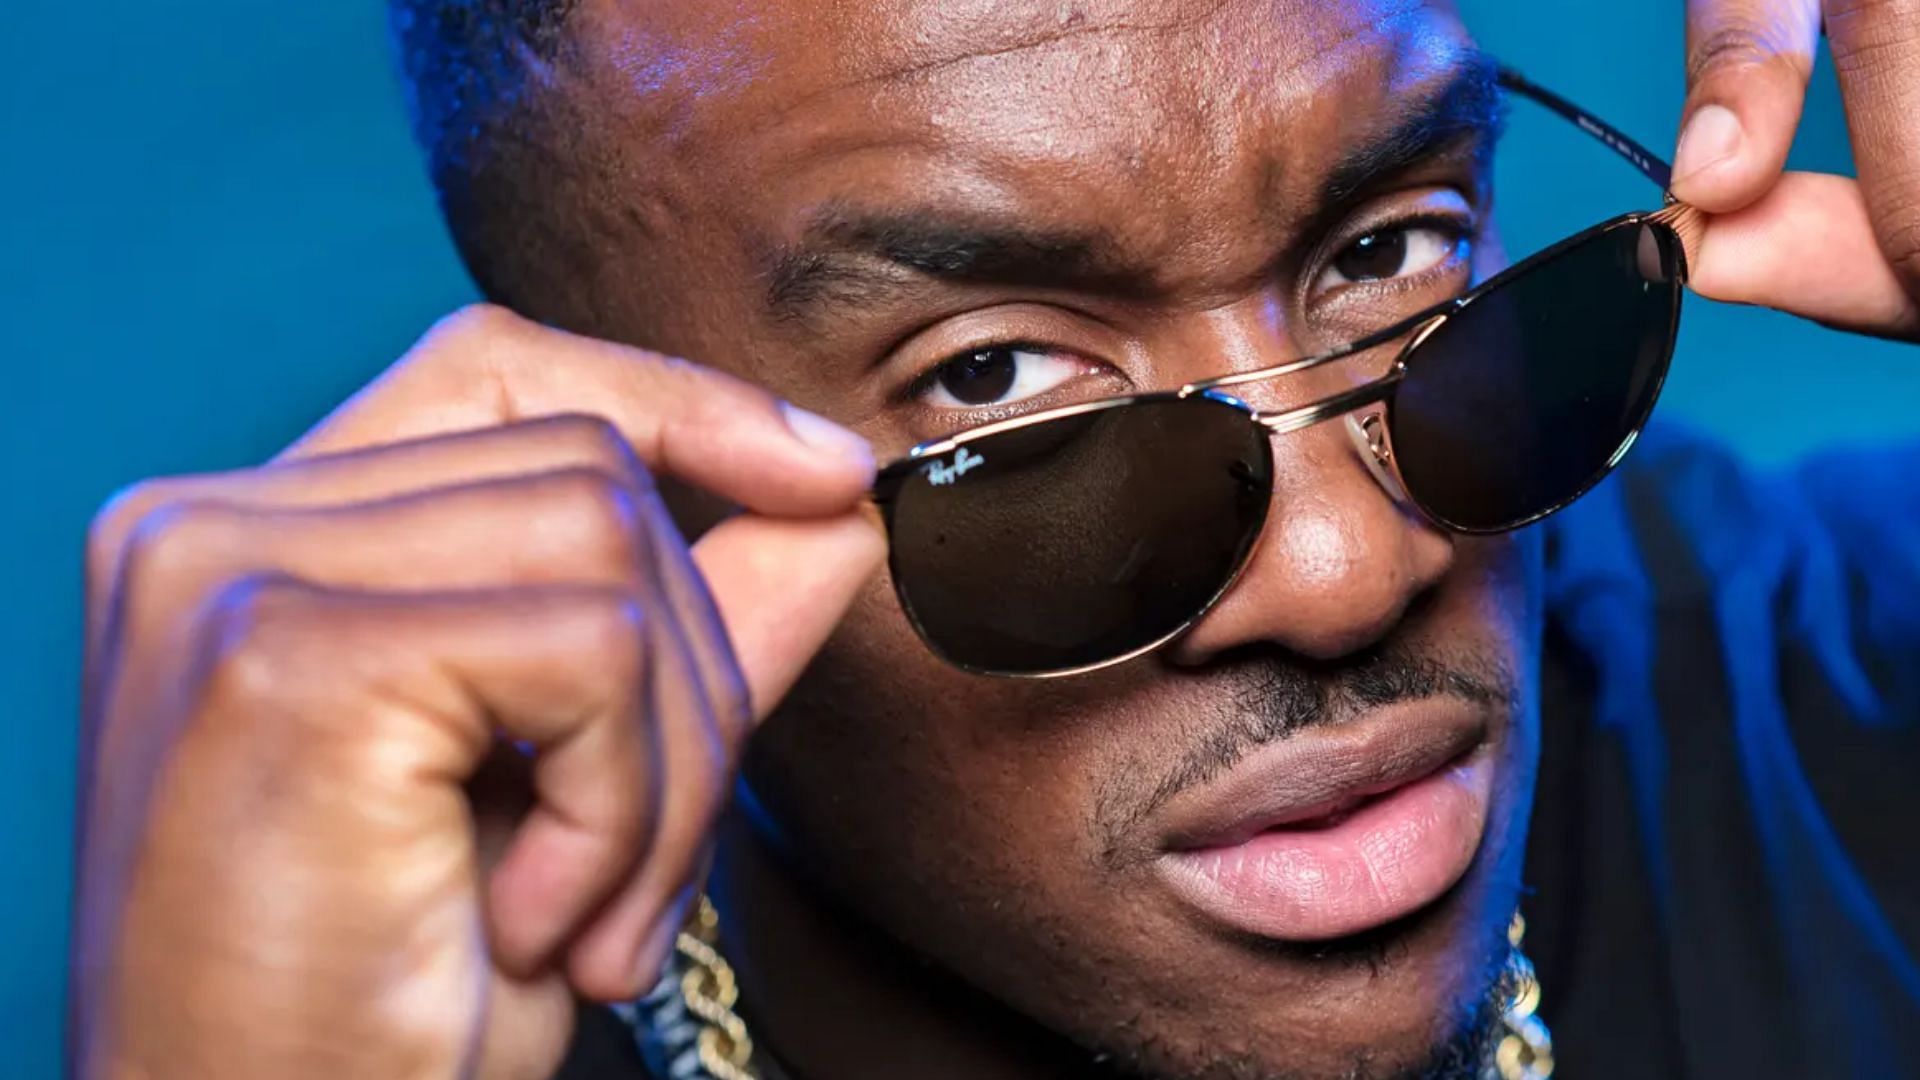 An image of the British rapper (Image via The Guardian)